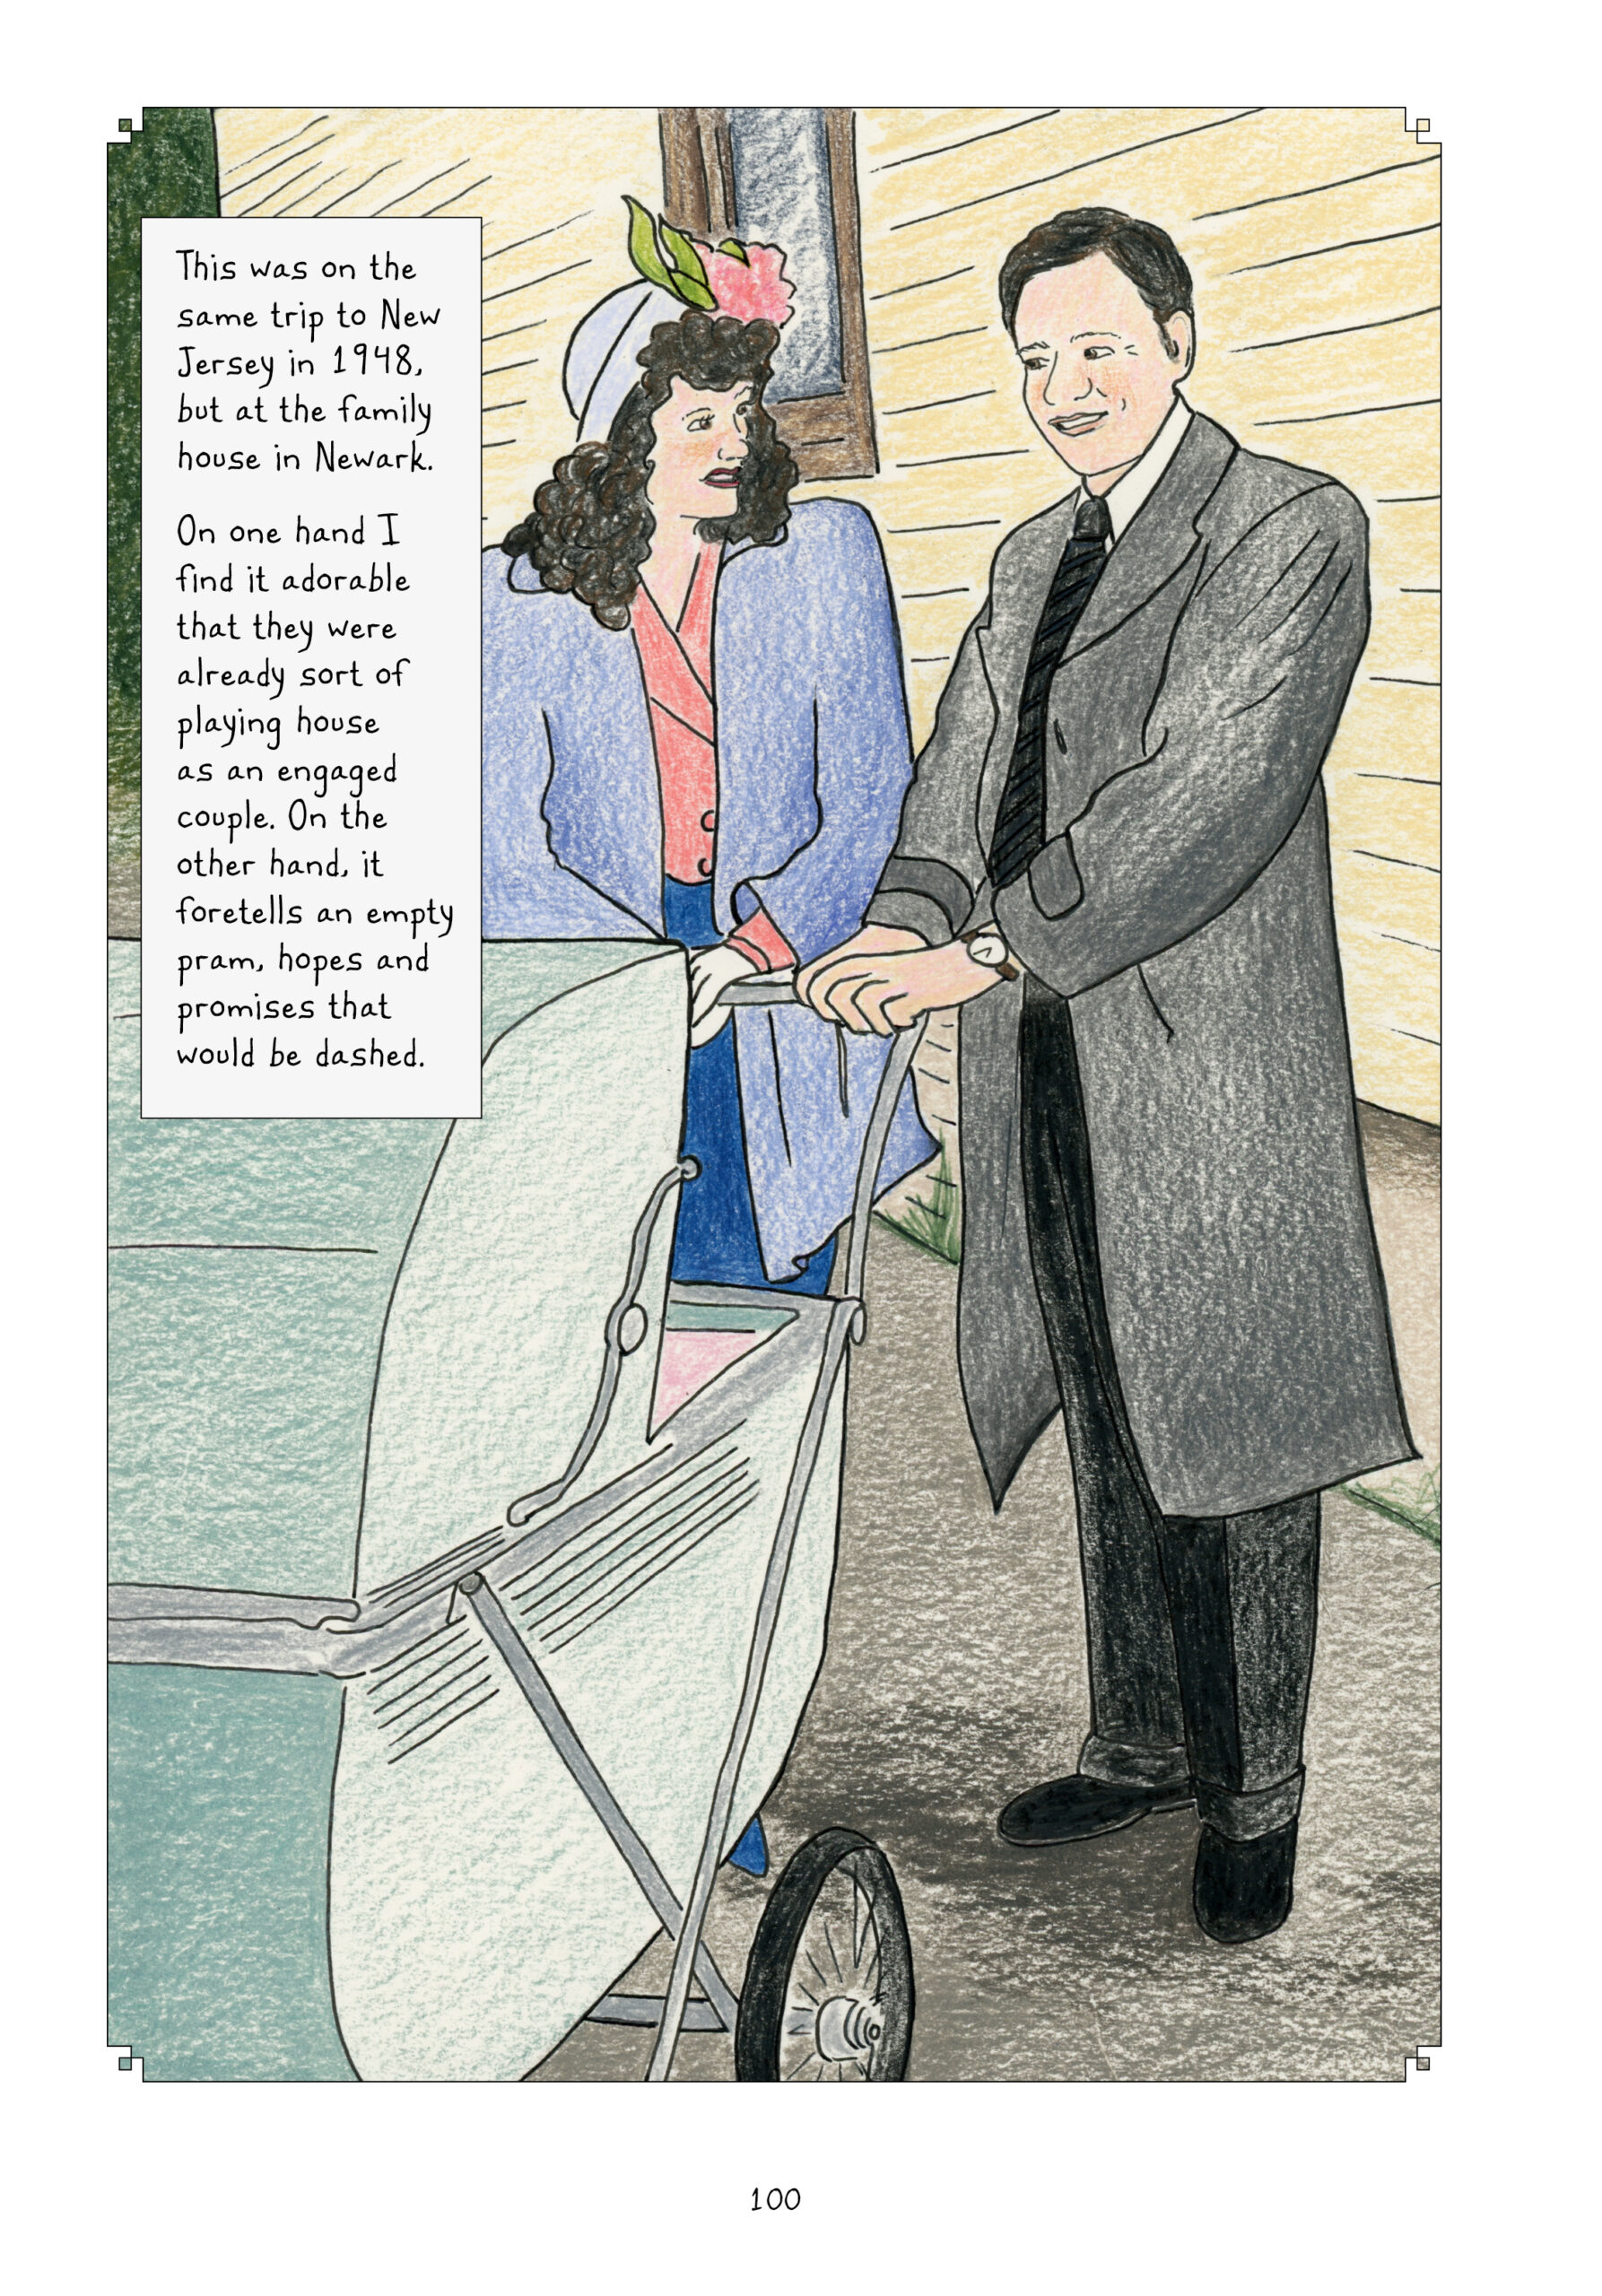 A young Lorraine and Lynnâ€™s dad stand next to each other holding onto a green pram baby stroller. They are looking at each other and smiling. Lorraine is dressed as usual in a stylish outfit of the times, including a hat topped with a large flower decoration. Lynnâ€™s dad wears a gray trench coat over a suite shirt and tie, black trousers, and loafers. Lynn writes, â€œThis was on the same trip to New Jersey in 1948, but at the family house in Newark. On one hand I find it adorable that they were already sort of playing house as an engaged couple. On the other hand, it foretells an empty pram, hopes and promises that would be dashed.â€